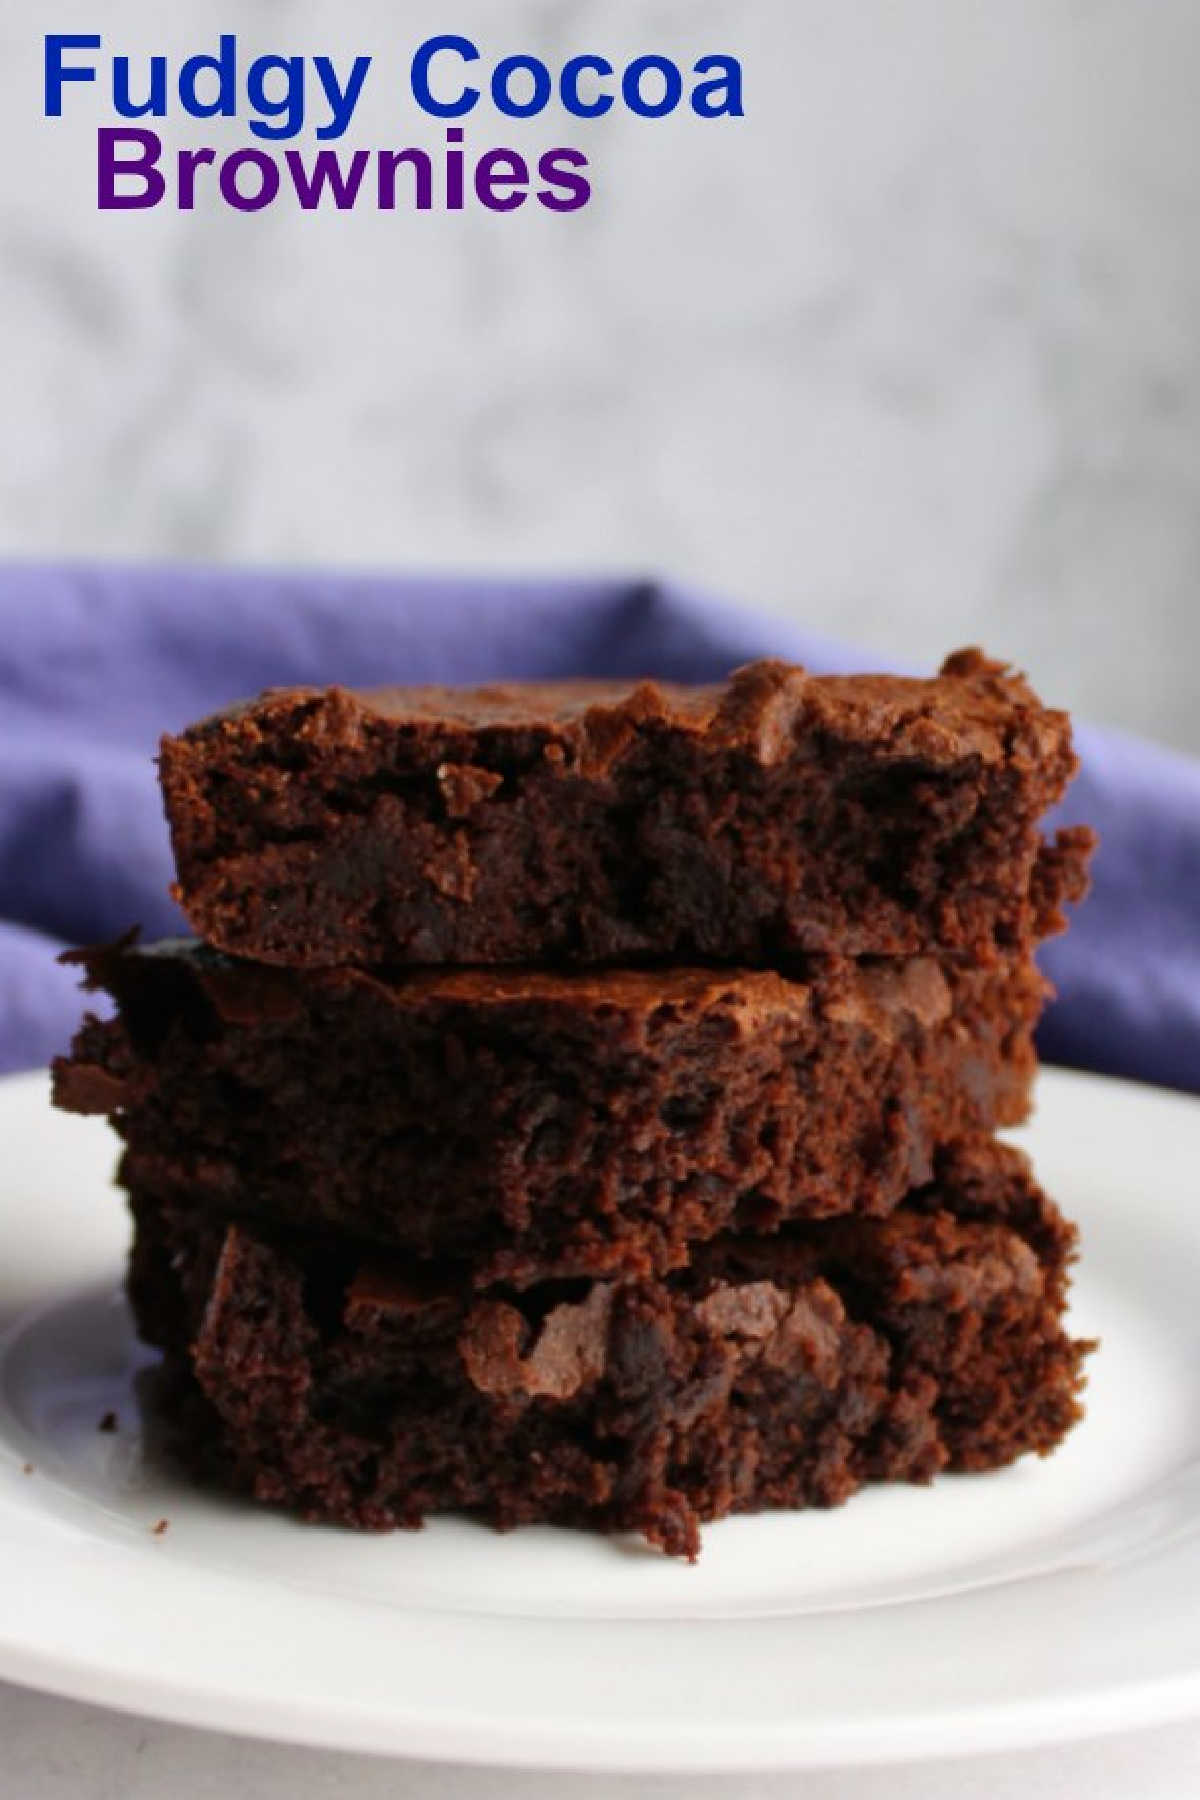 These brownies are simple to make. They are rich, fudgy and delicious and get their big chocolate flavor from cocoa powder. They are ready to hit the oven in just a couple of minutes.